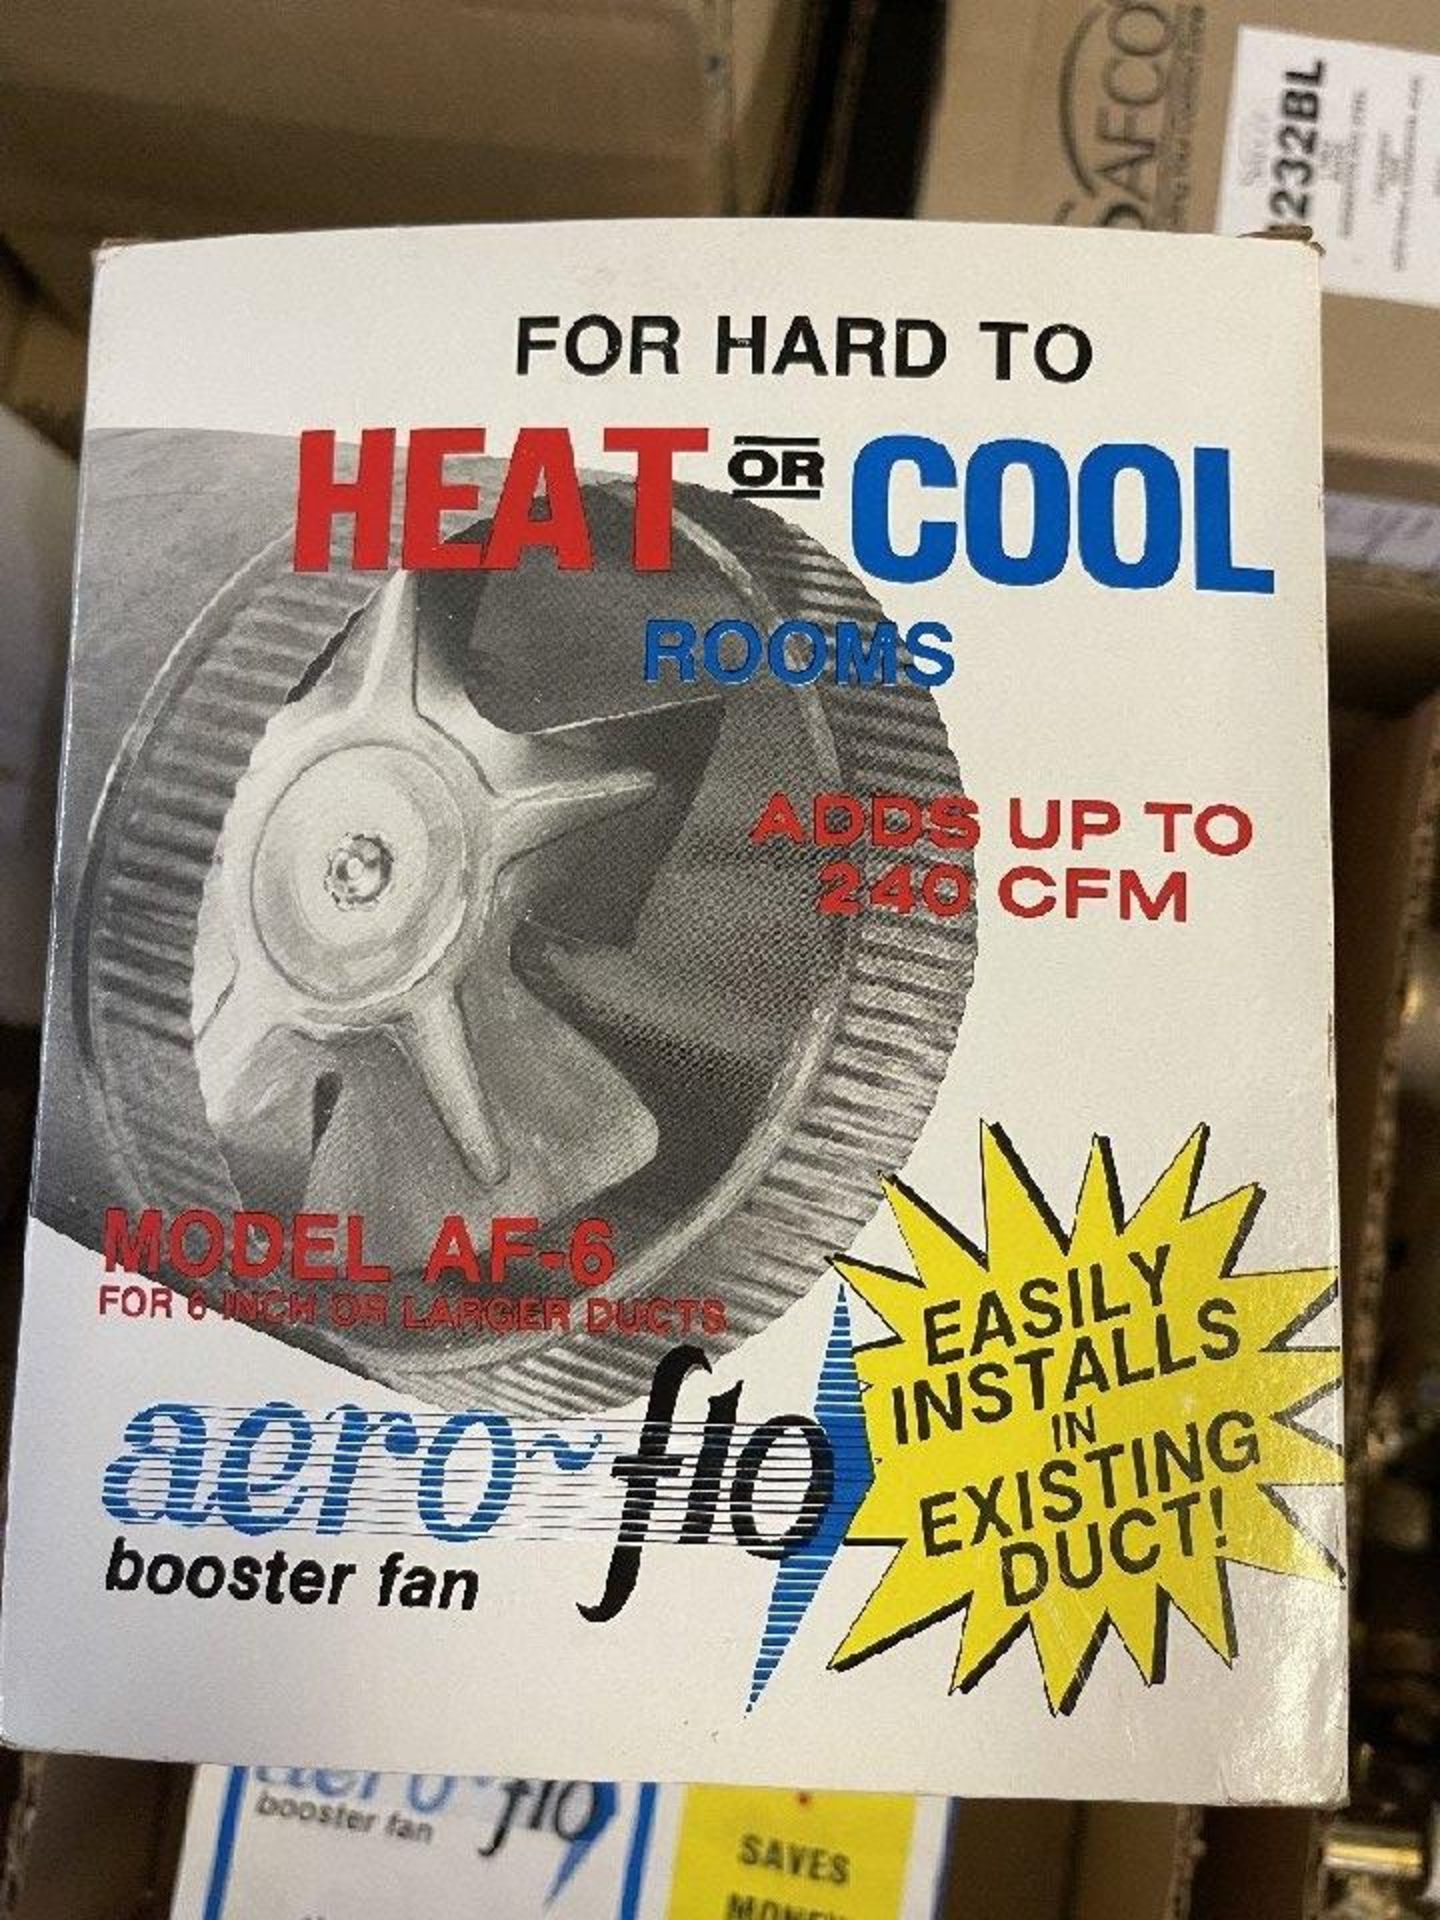 Aero-Flo Booster Fans - Image 2 of 2